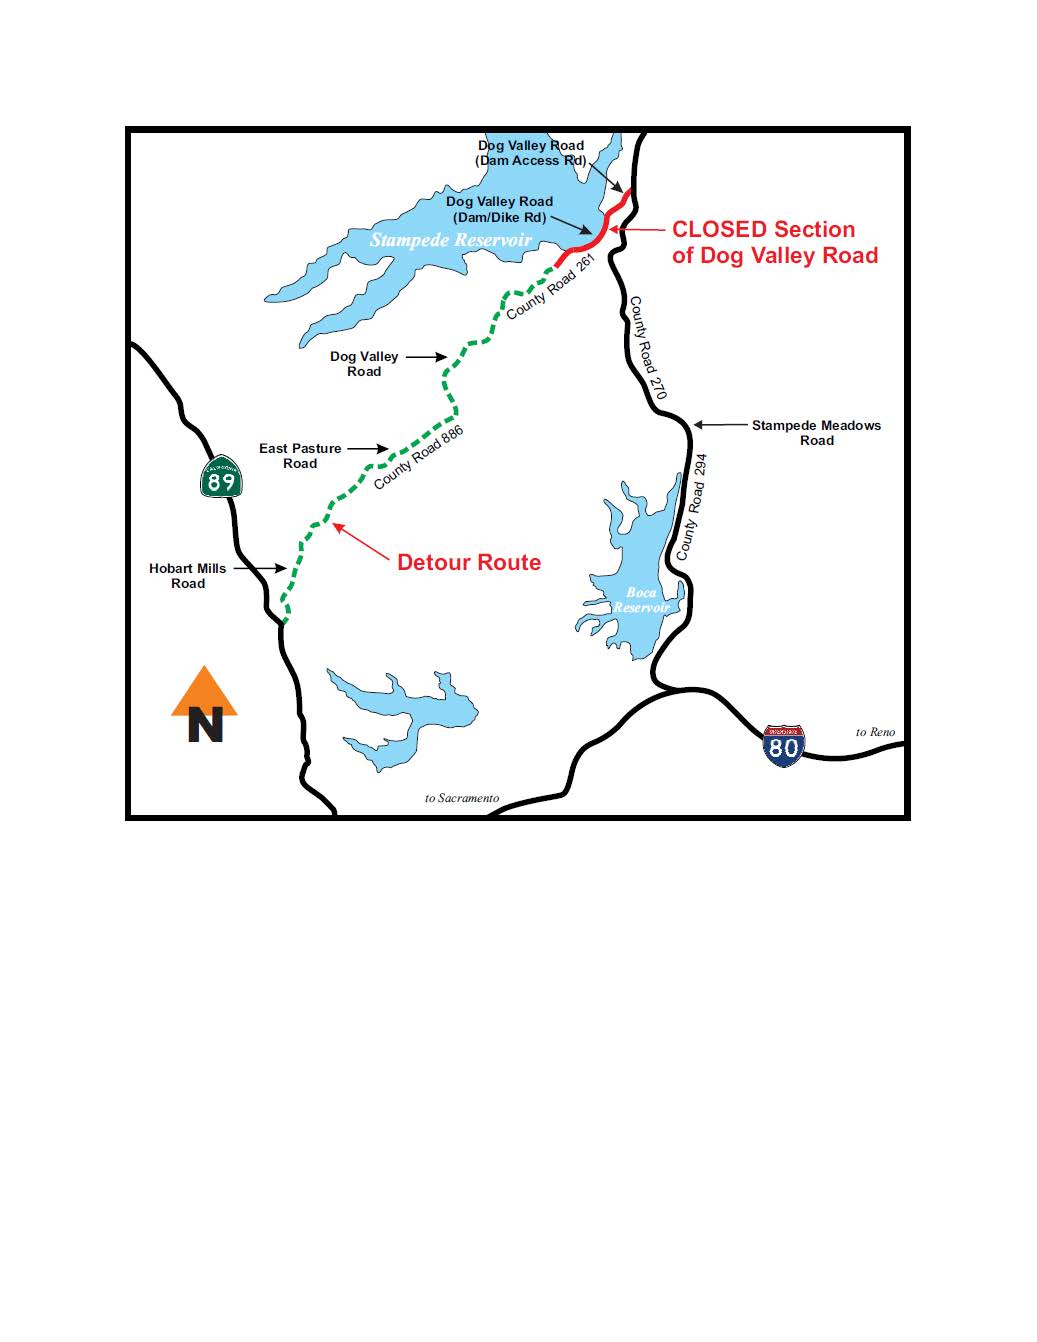 Noninteractive detour map to Stampede Reservoir during construction